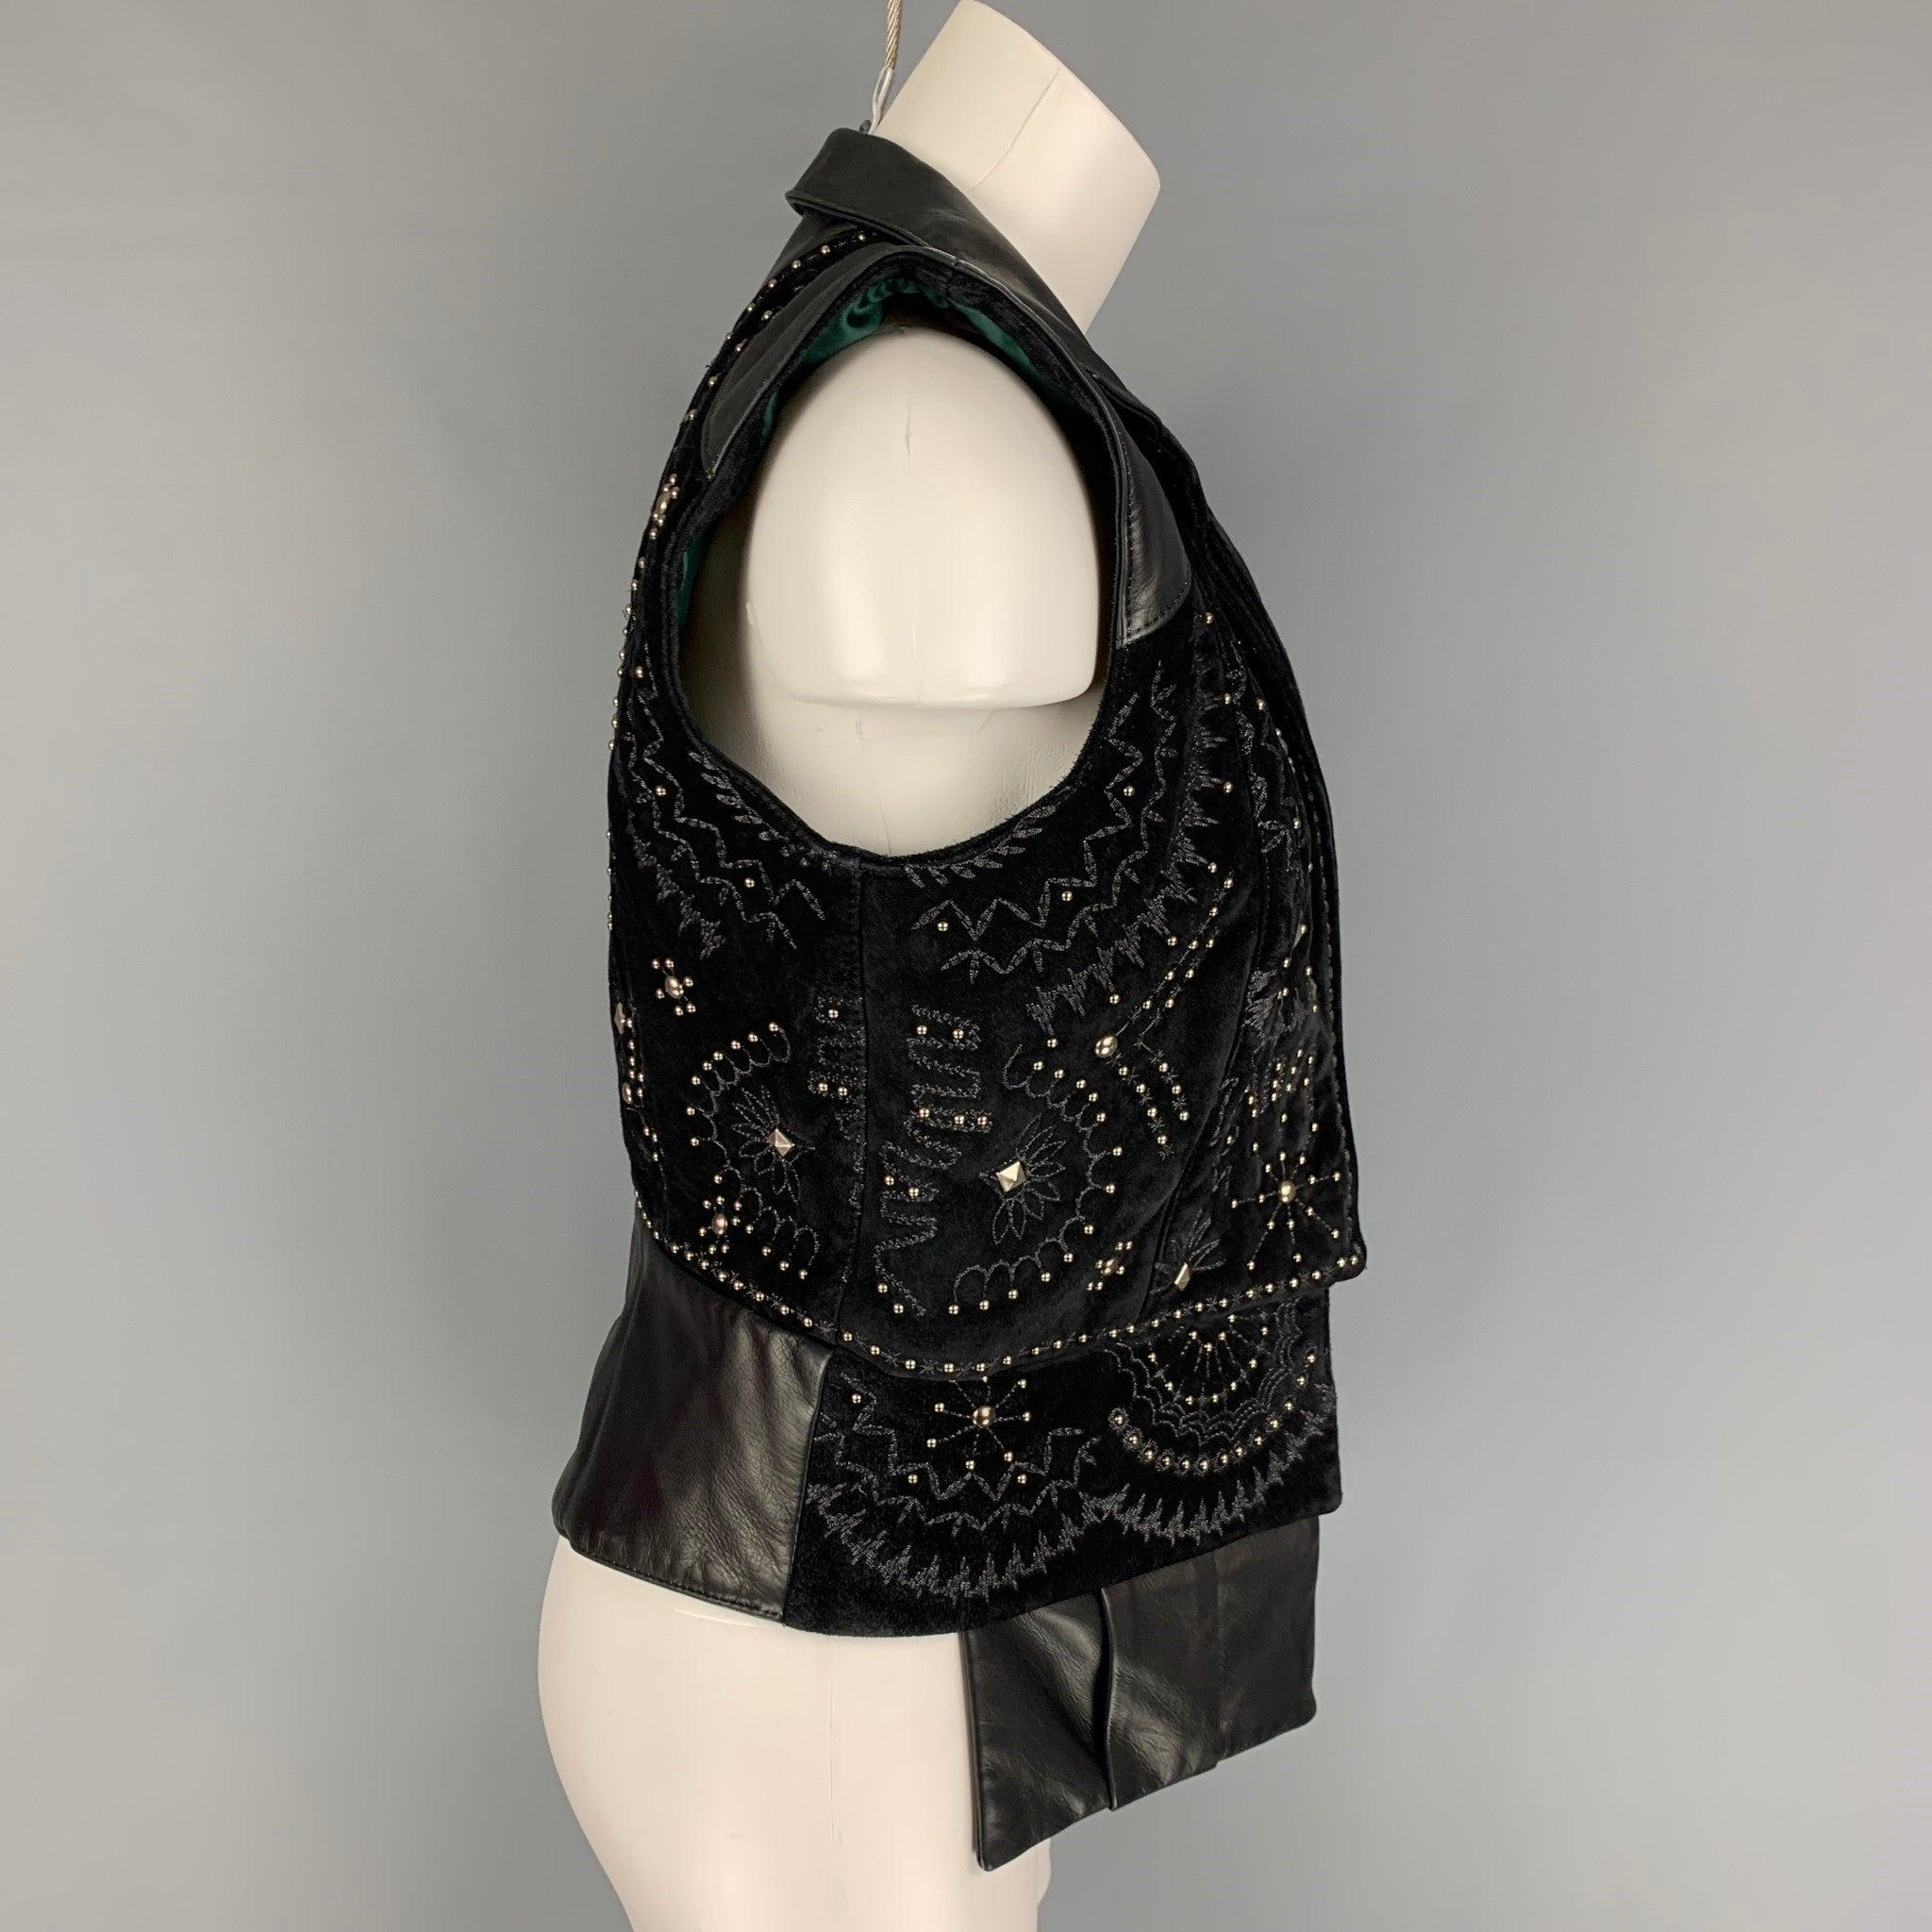 DONALD J PLINER vest comes in a black leather featuring hidden panel pocket details, studded embellishments, spread collar, embroidery, and a hidden placket closure.
Very Good
Pre-Owned Condition. 

Marked:   SML 

Measurements: 
 
Shoulder: 15